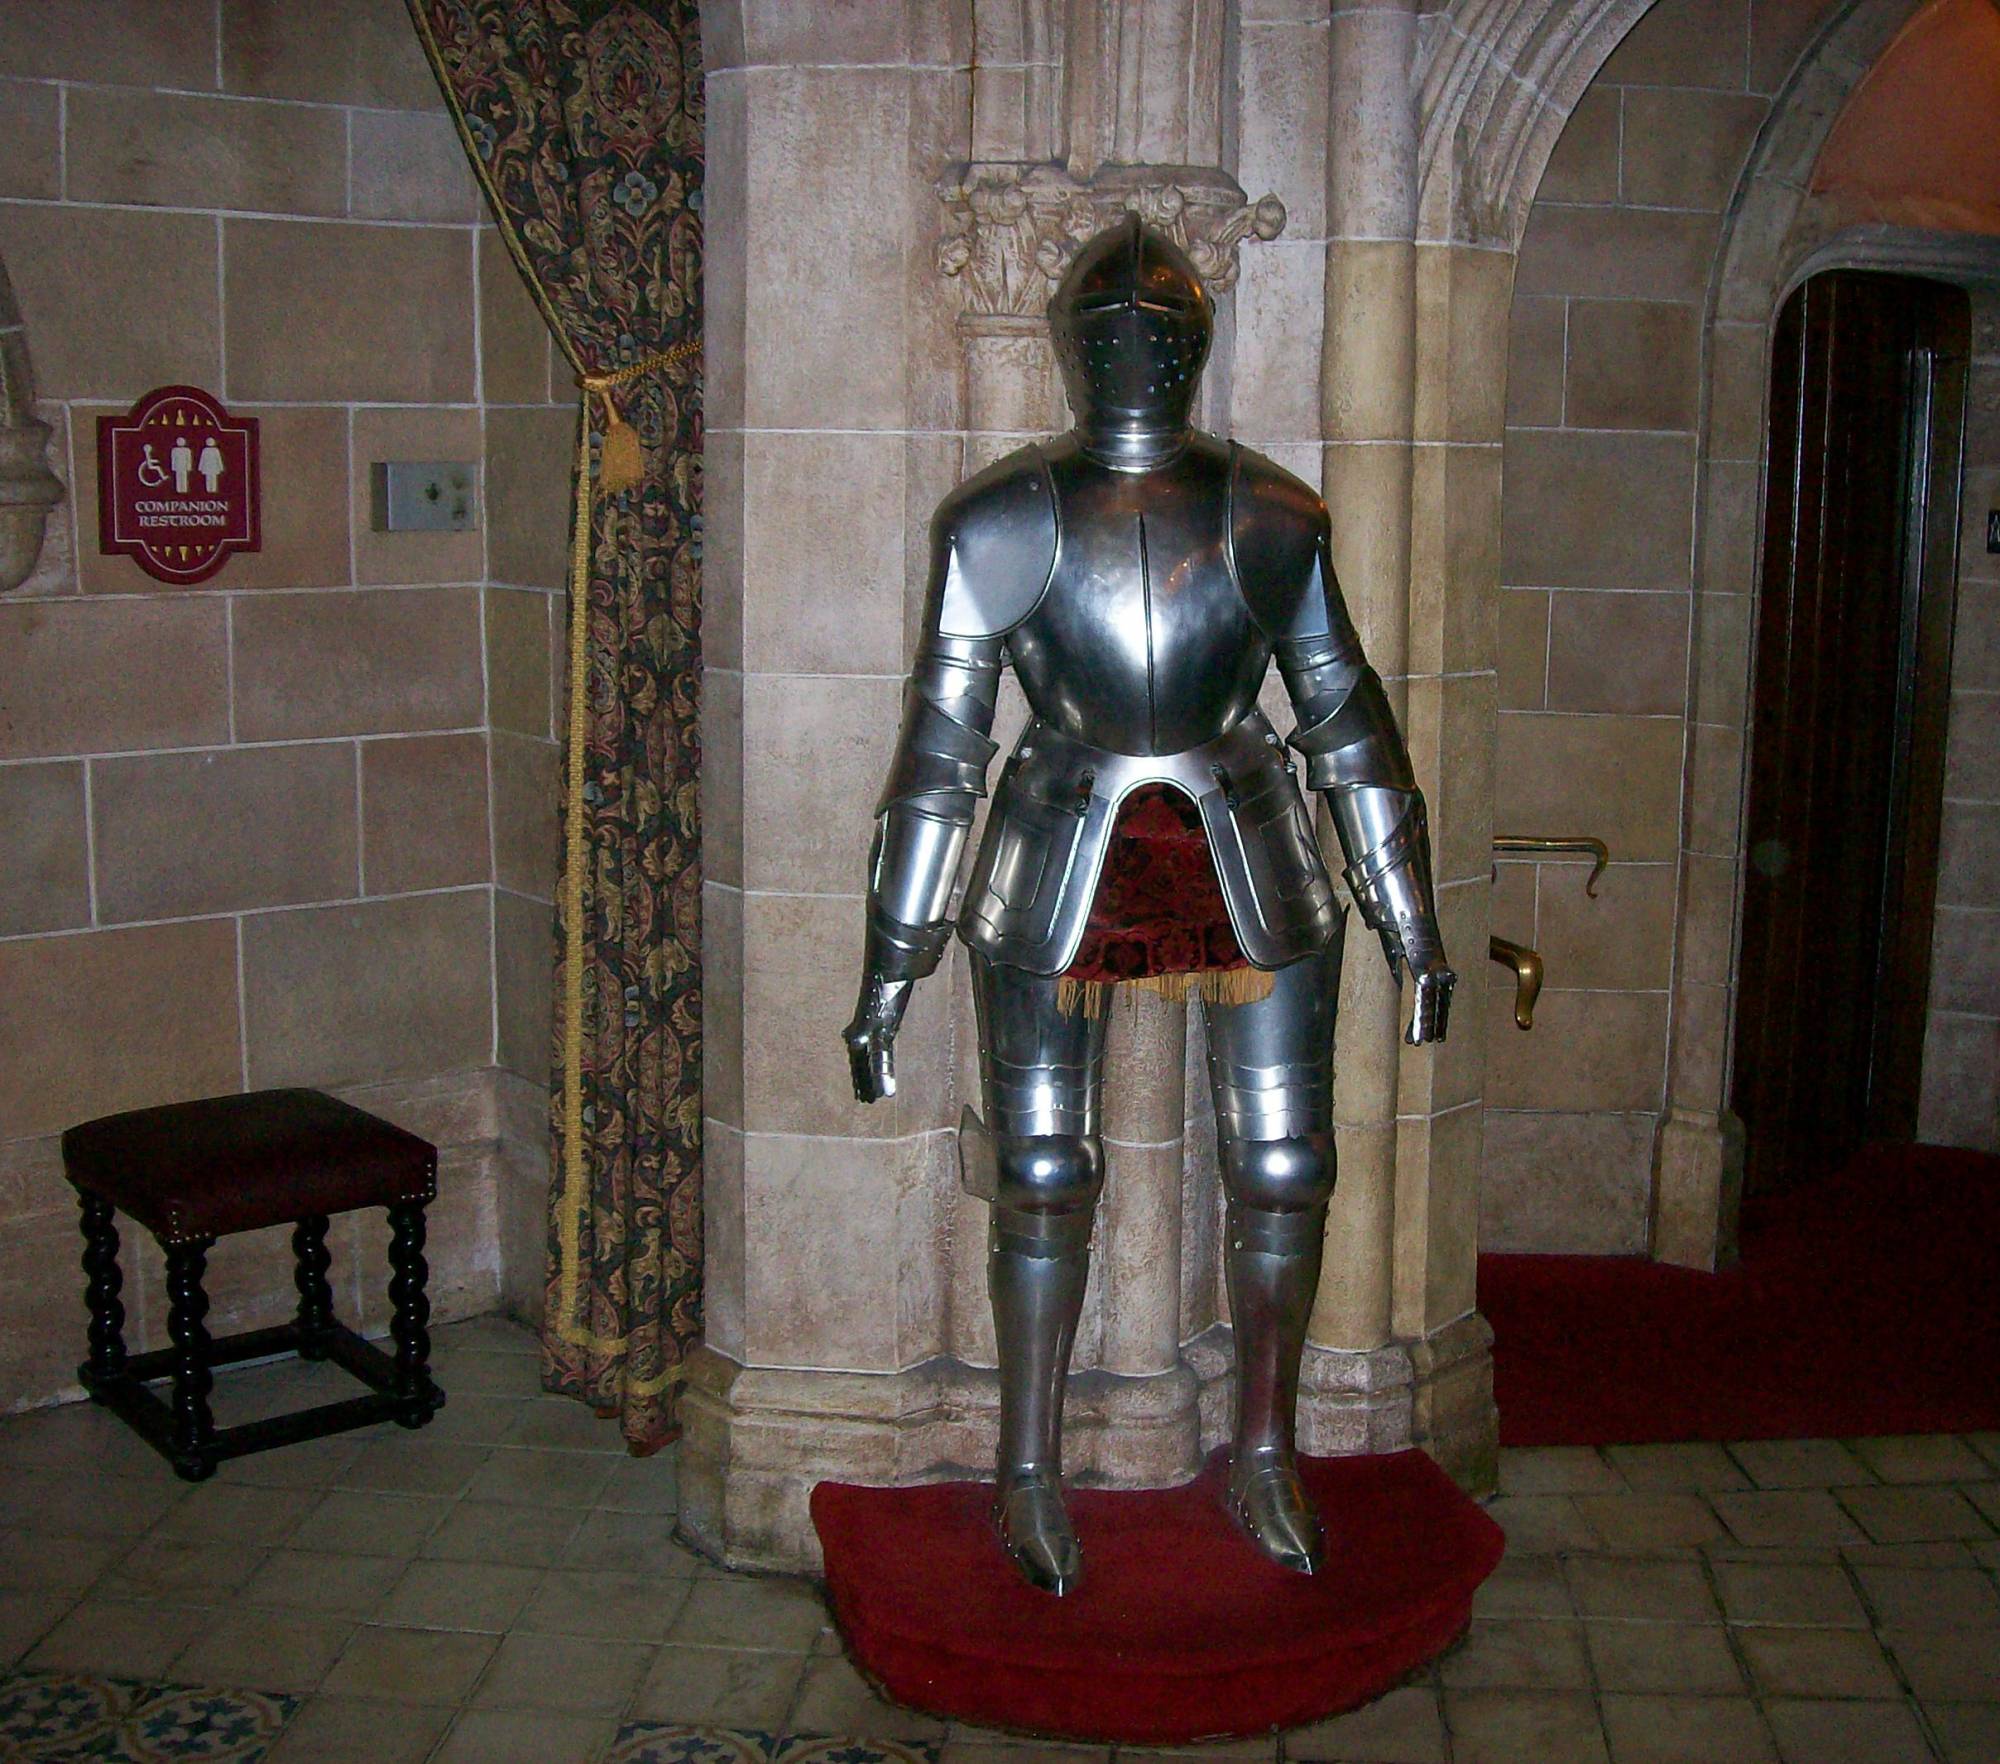 A suit of armor at Cinderella's Royal Table in Fantasyland